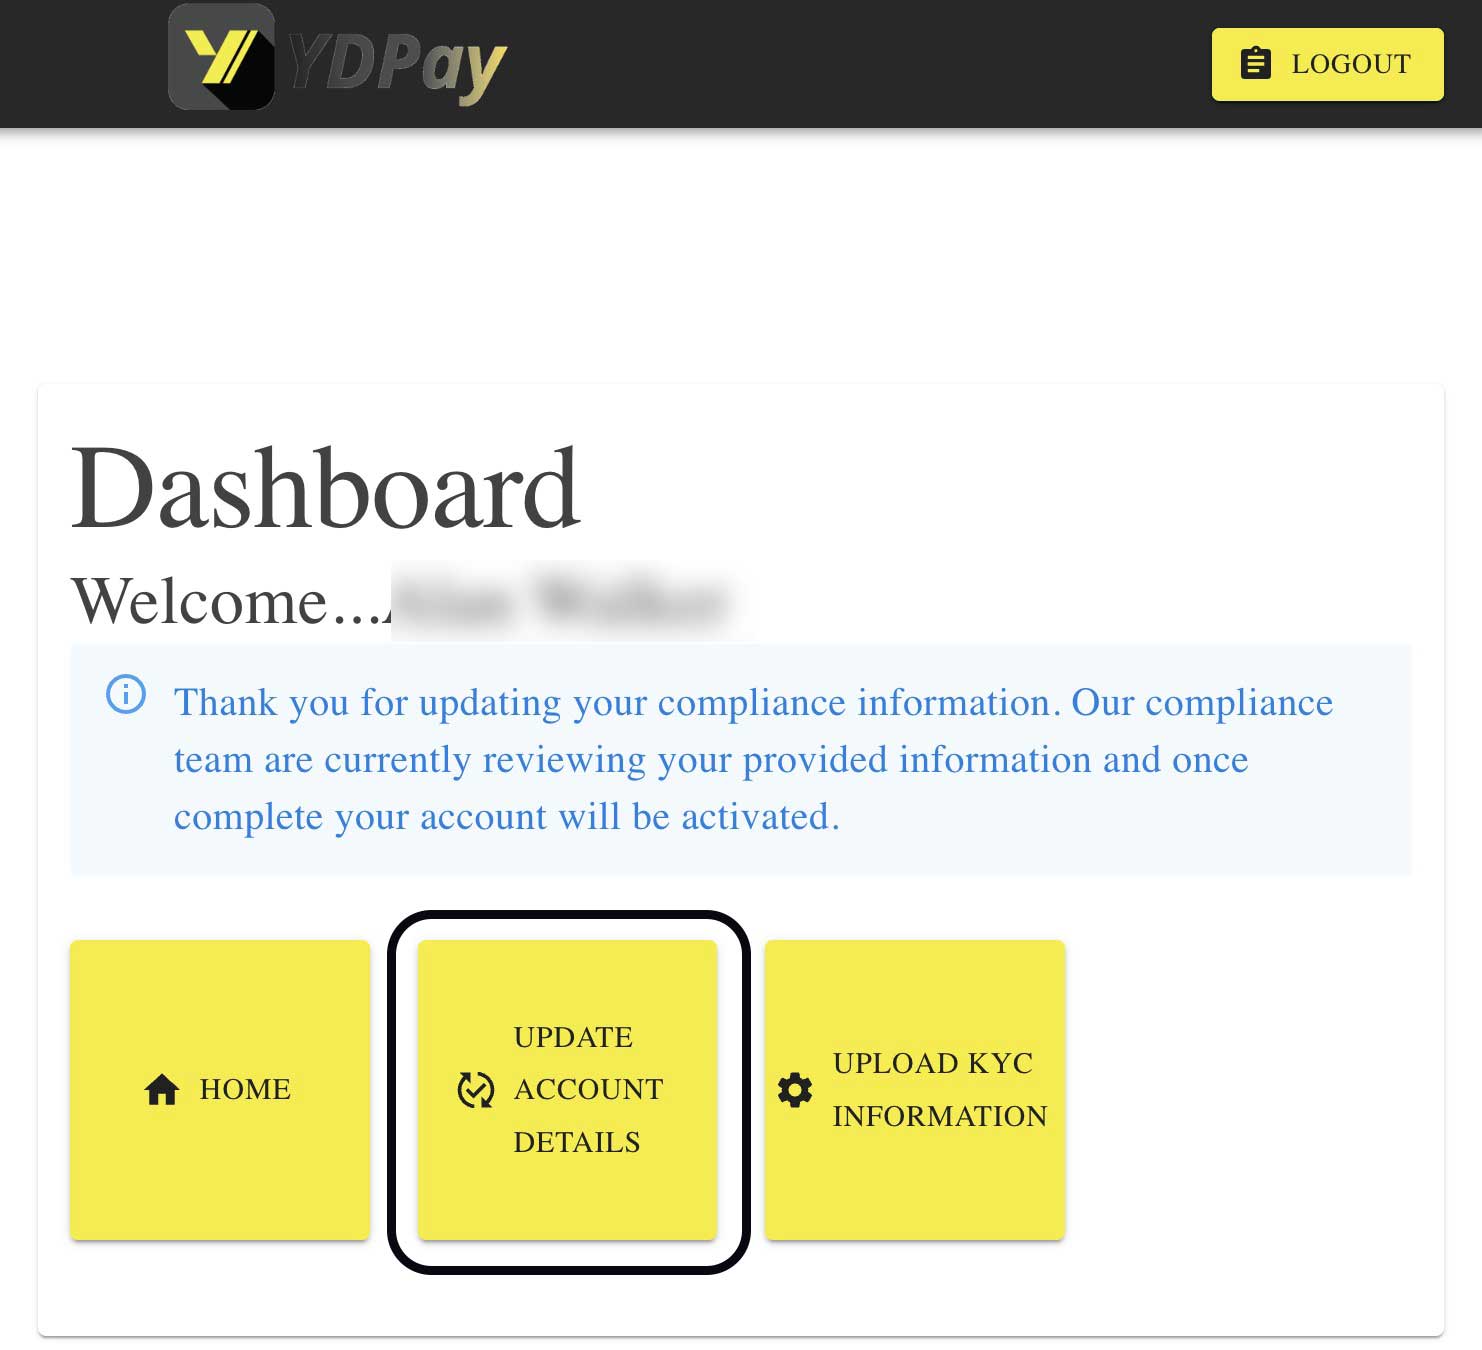 ydpay-account-settings-2